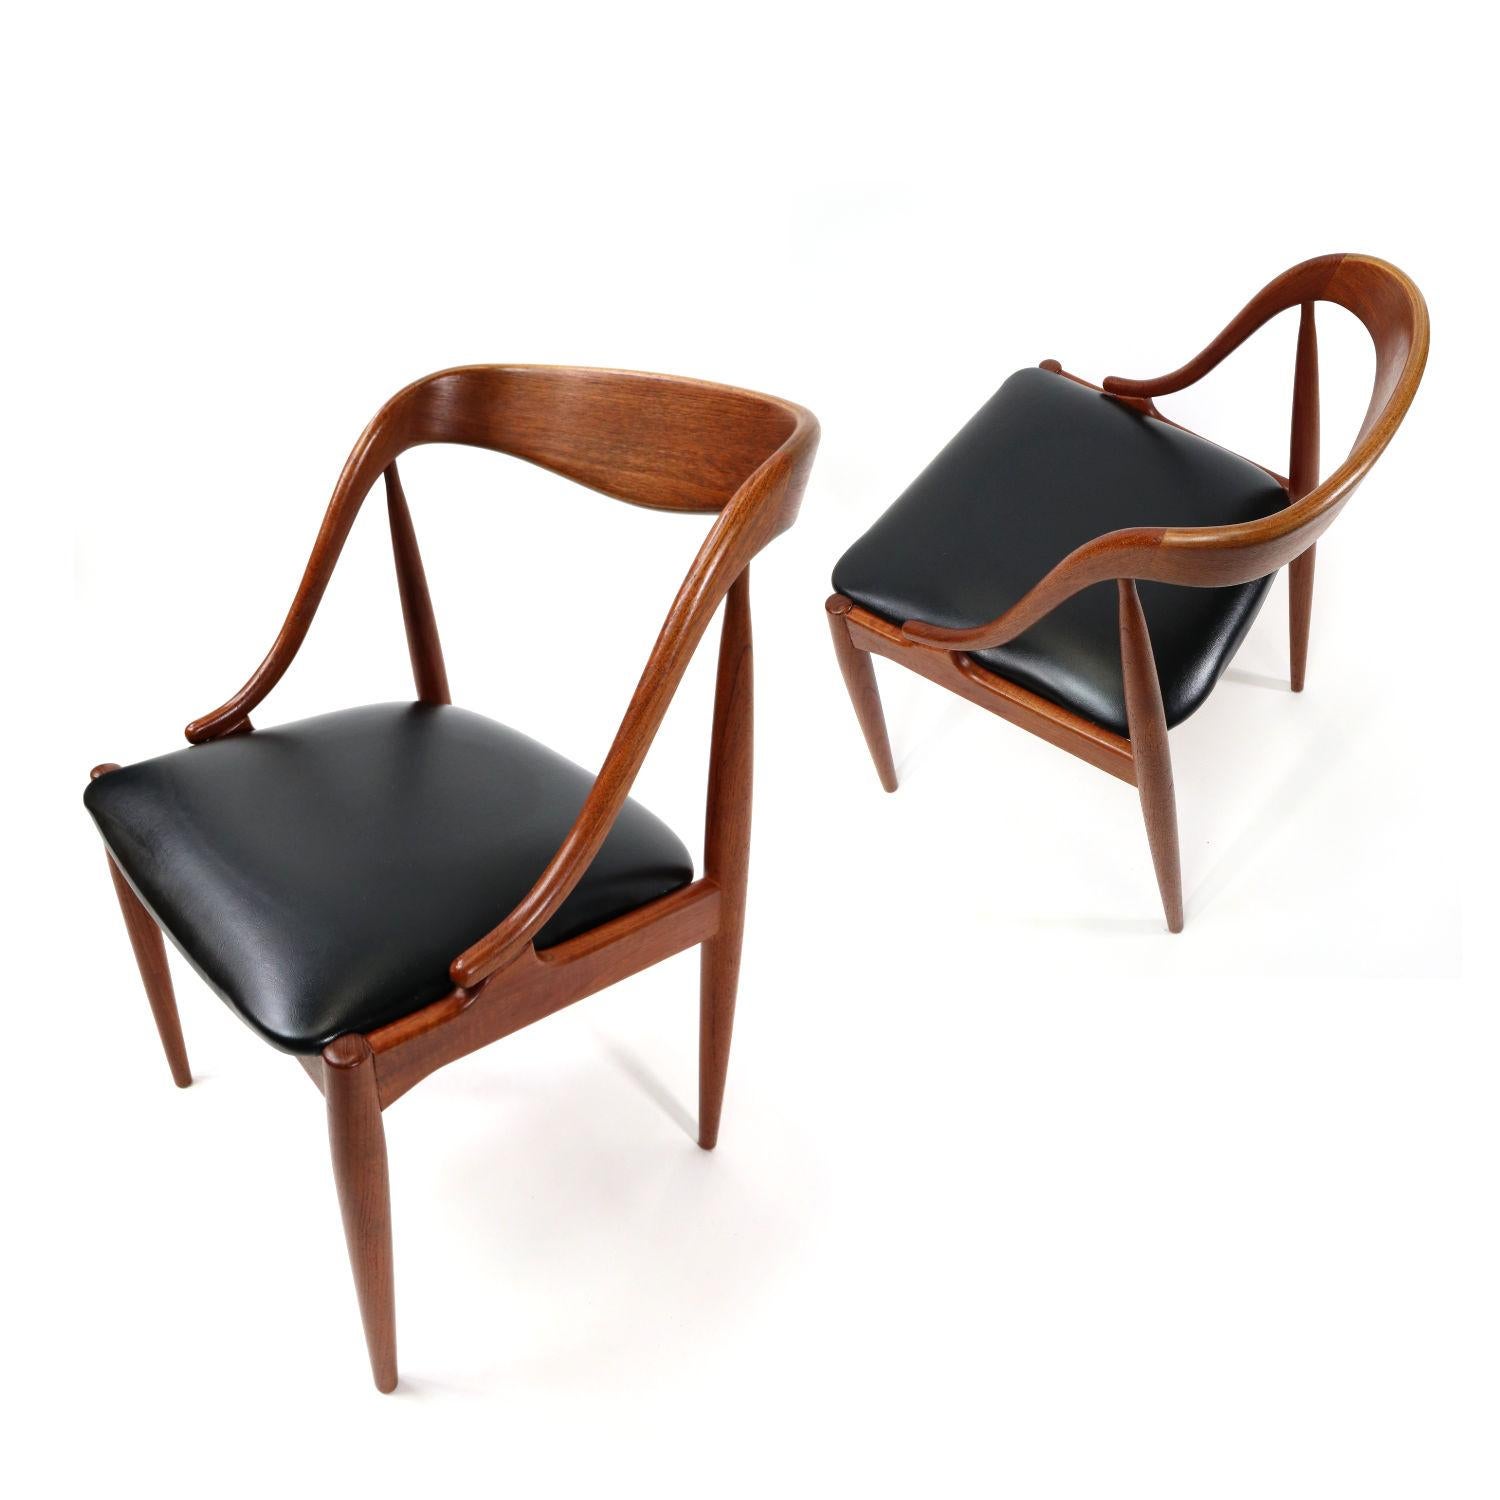 Absolutely exquisite set Mid-Century Modern Danish teak dining chairs. This set of 10 chairs was designed by Johannes Andersen for Uldum Møbelfabrik. The chairs are labeled beneath the seat. You don’t have to be a furniture pro to see how special